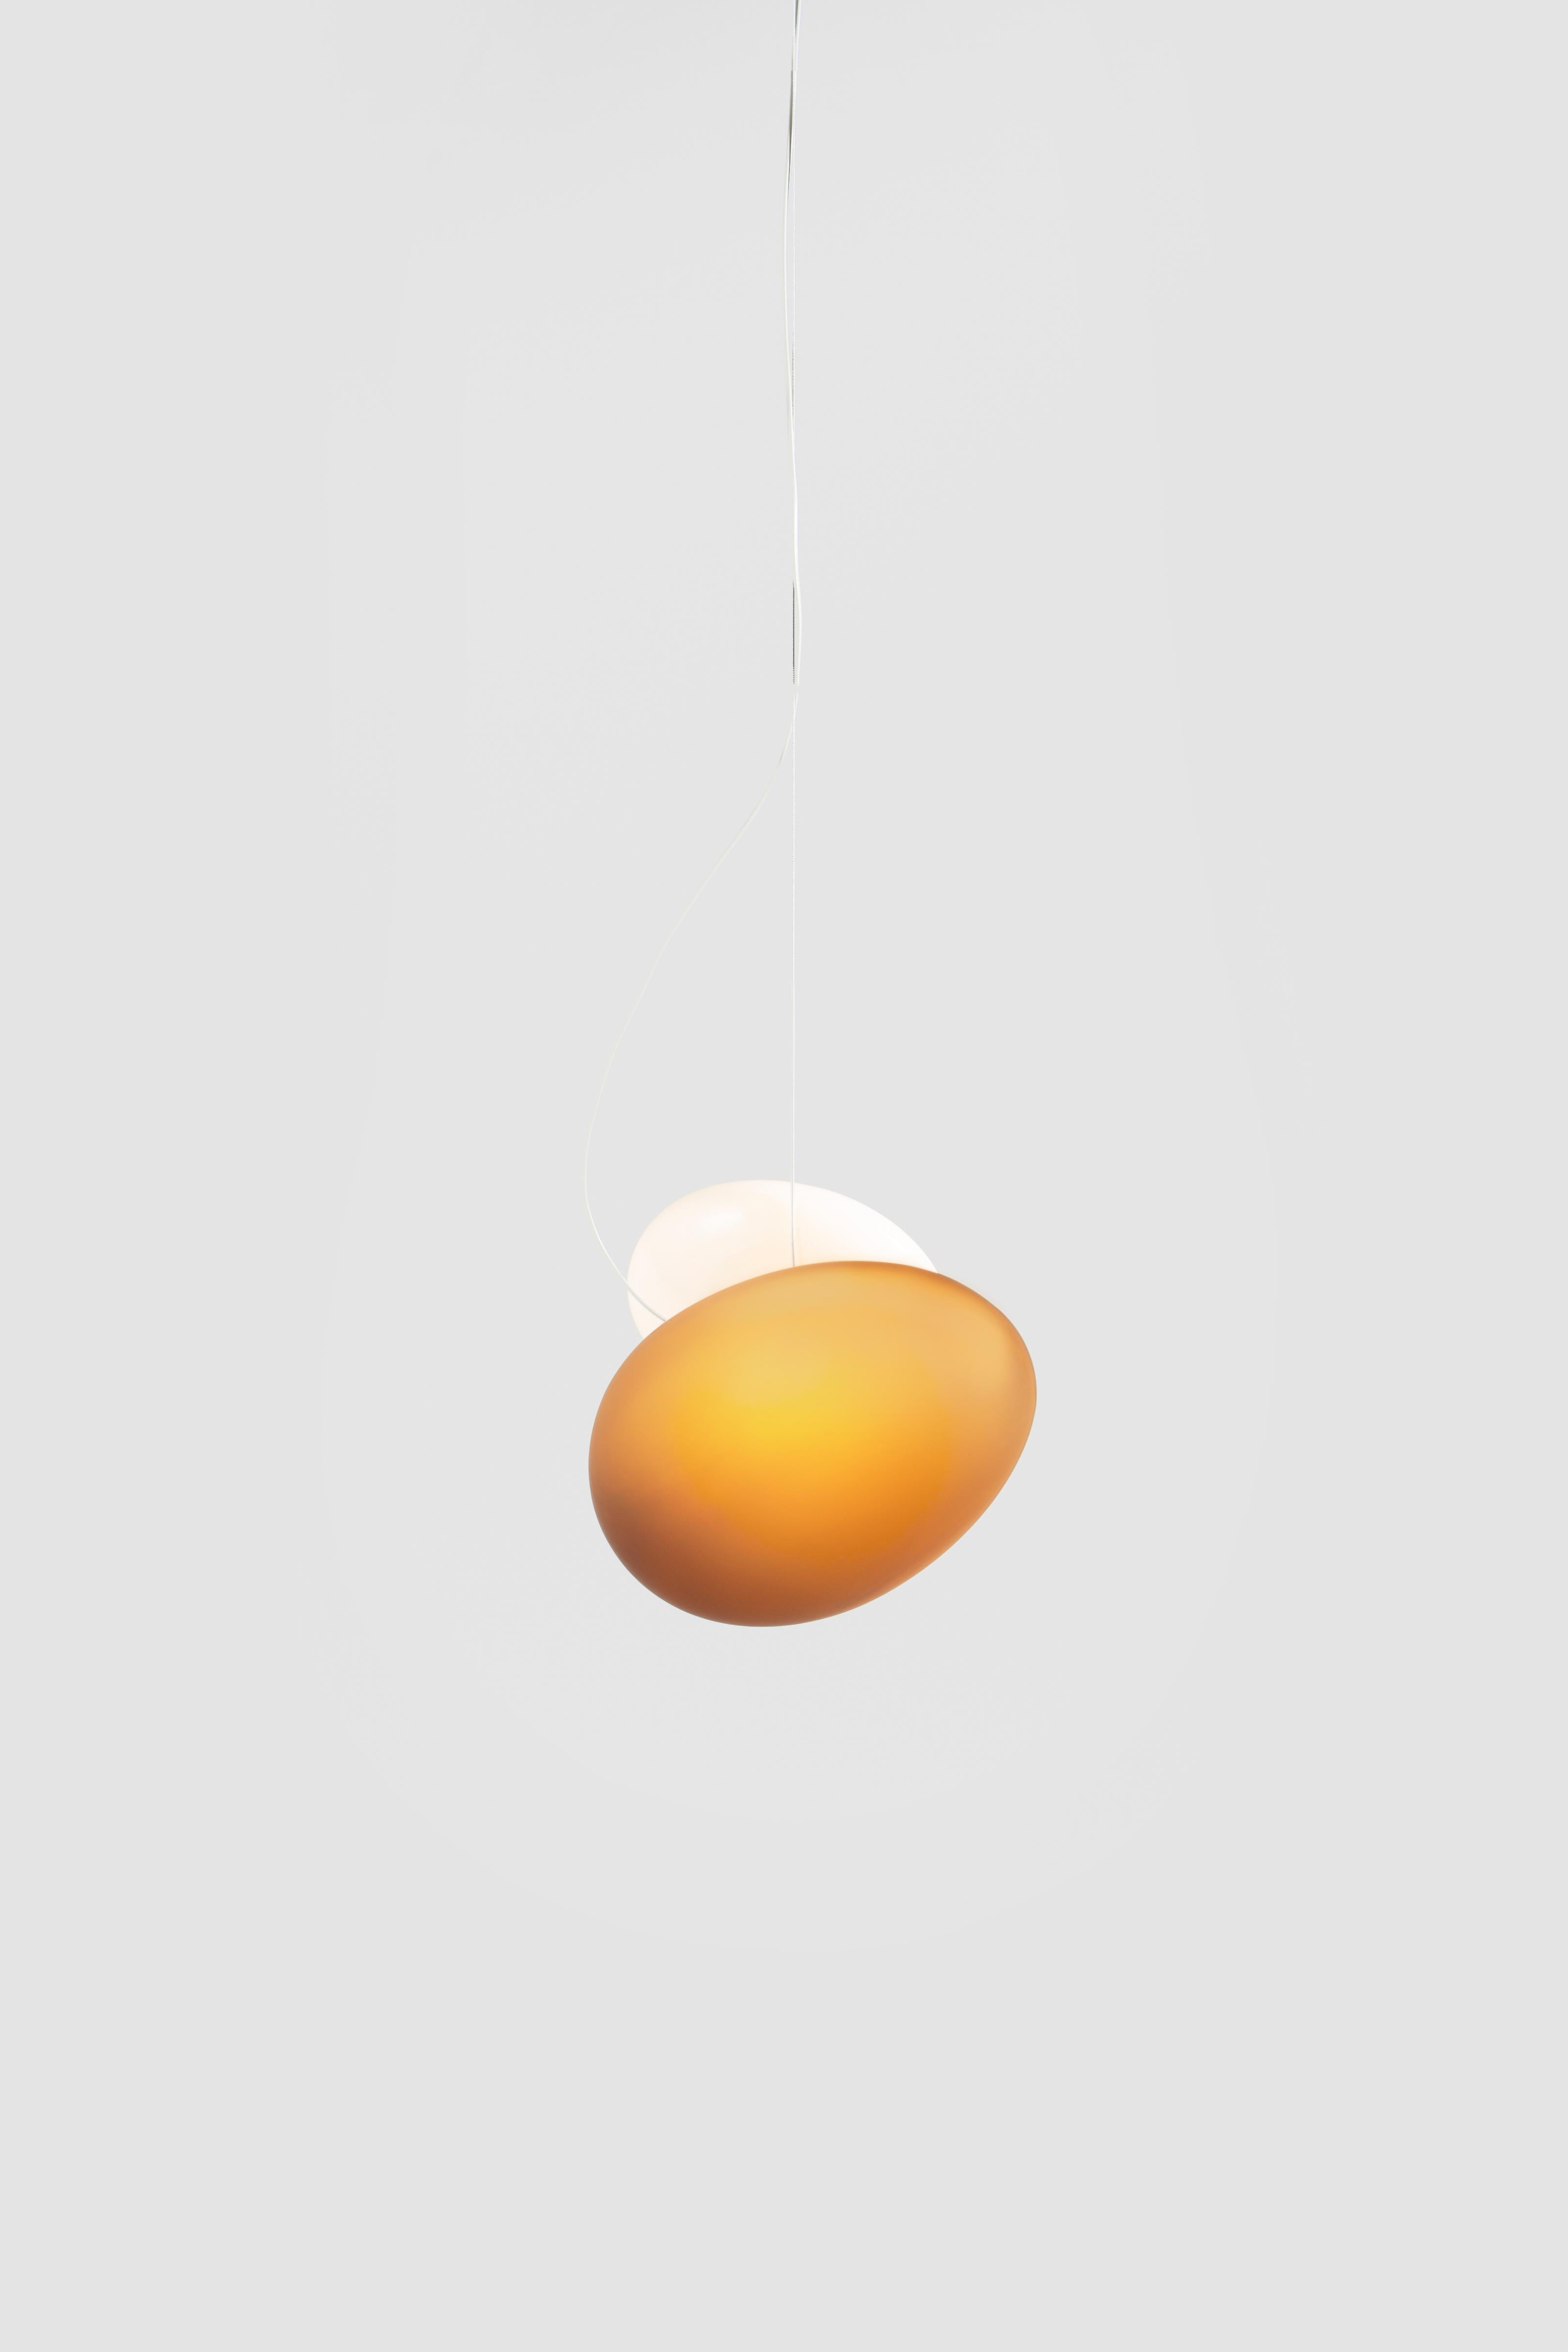 'Pebble' Contemporary pendant lamp 

Model in the picture: 
Color: Shape A (yellow citrine) D (white pearl)
Shapes: A + D

Wire length: 243 cm
Electrical: 14W LED 300ma, 2700K, Dimming: 0–10/ Triac

Available in white pearl, grey slate and